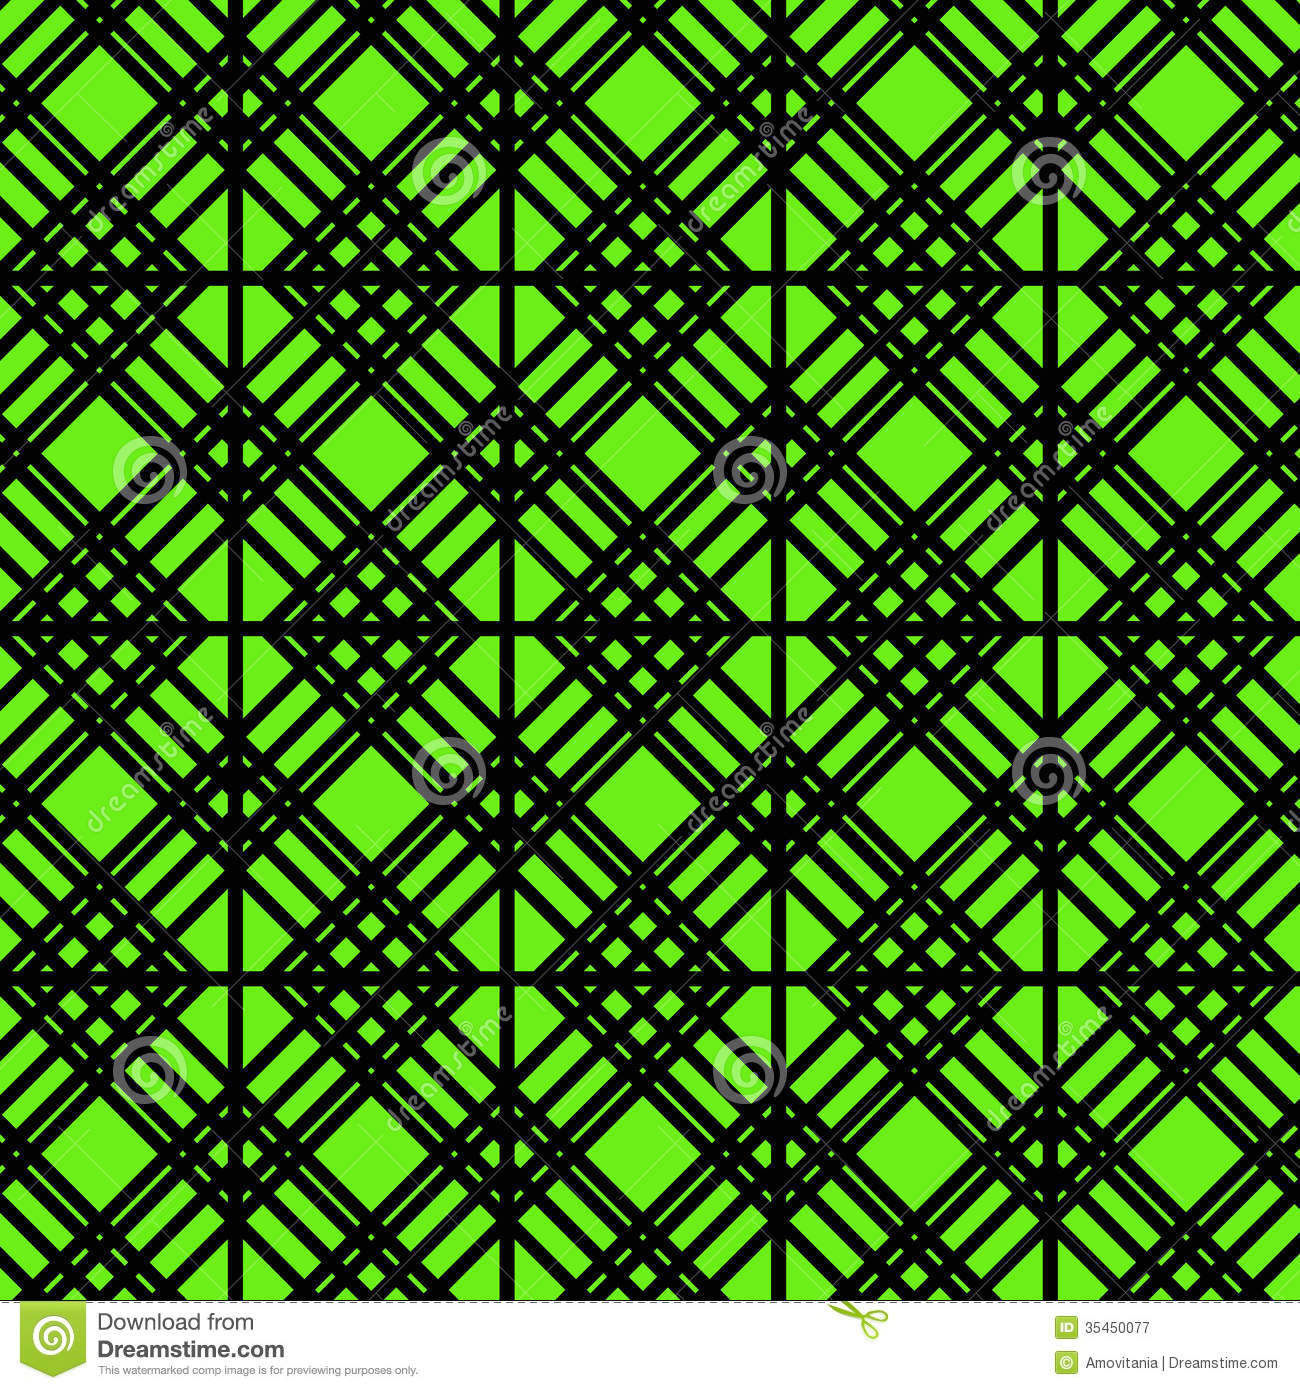 Contour Geometric Pattern On Green Background Royalty Free Stock